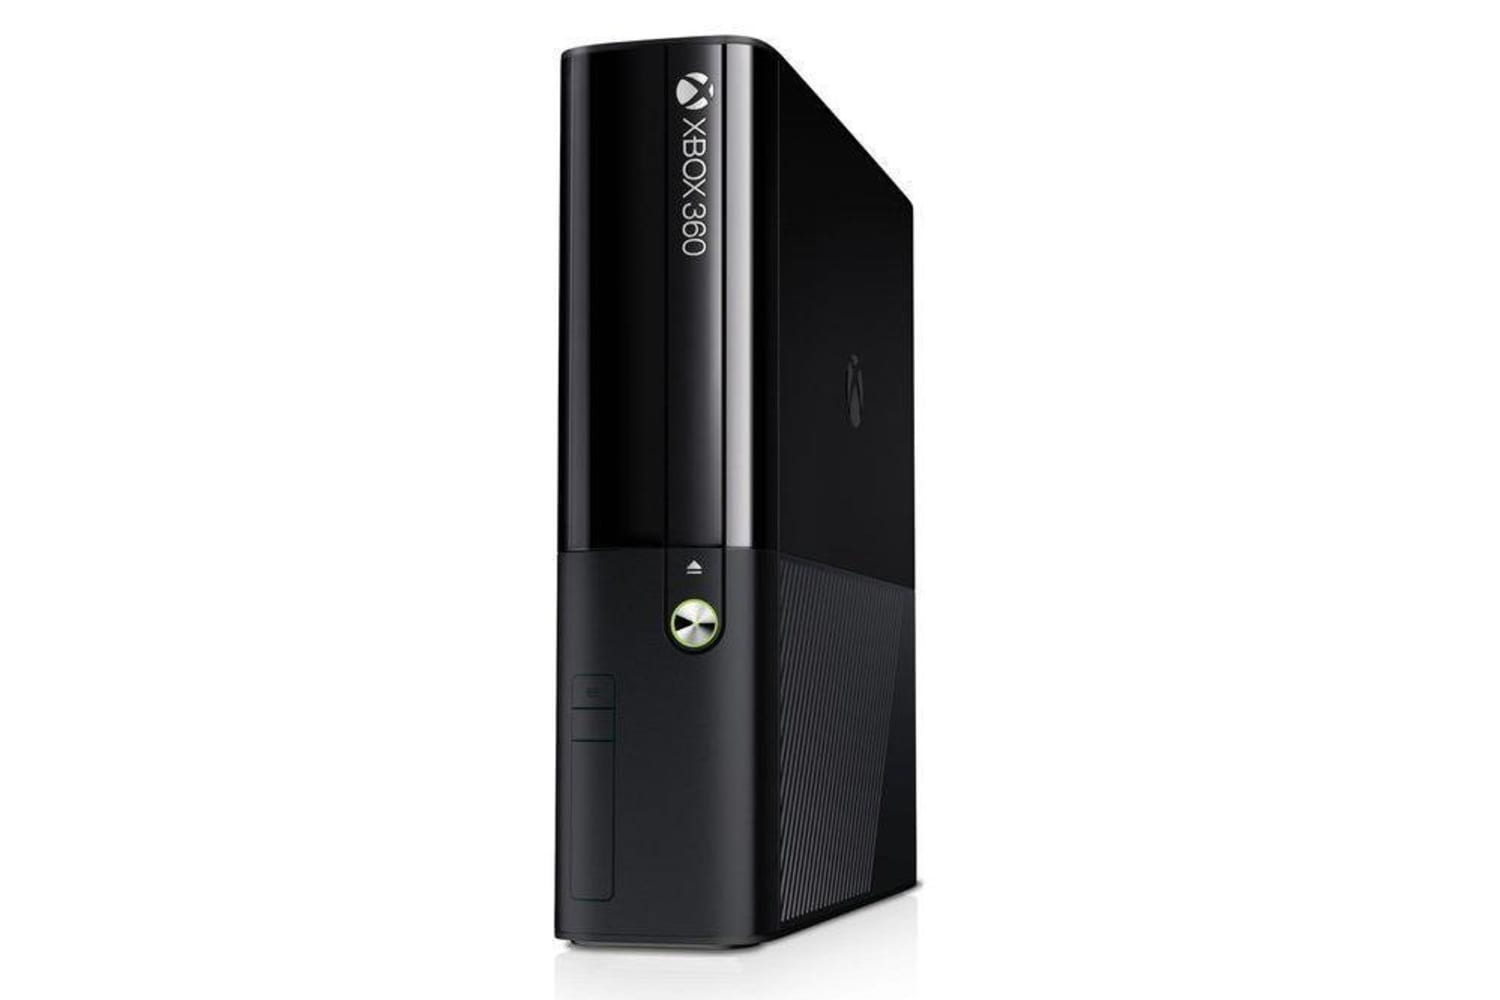 set xbox 360 as home console